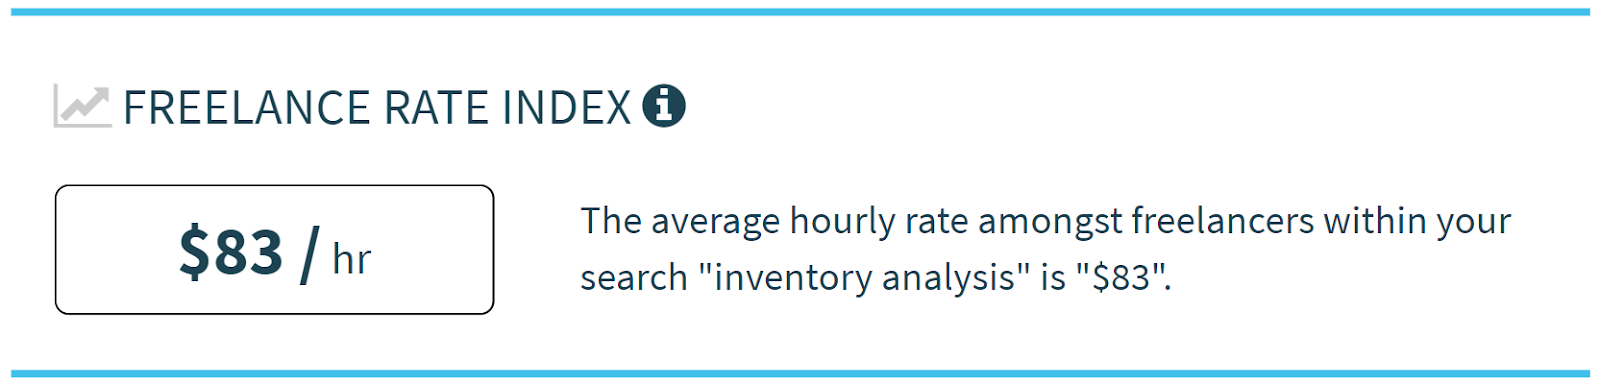 $ 83 / hour - Average hourly rate for a freelance inventory analyst